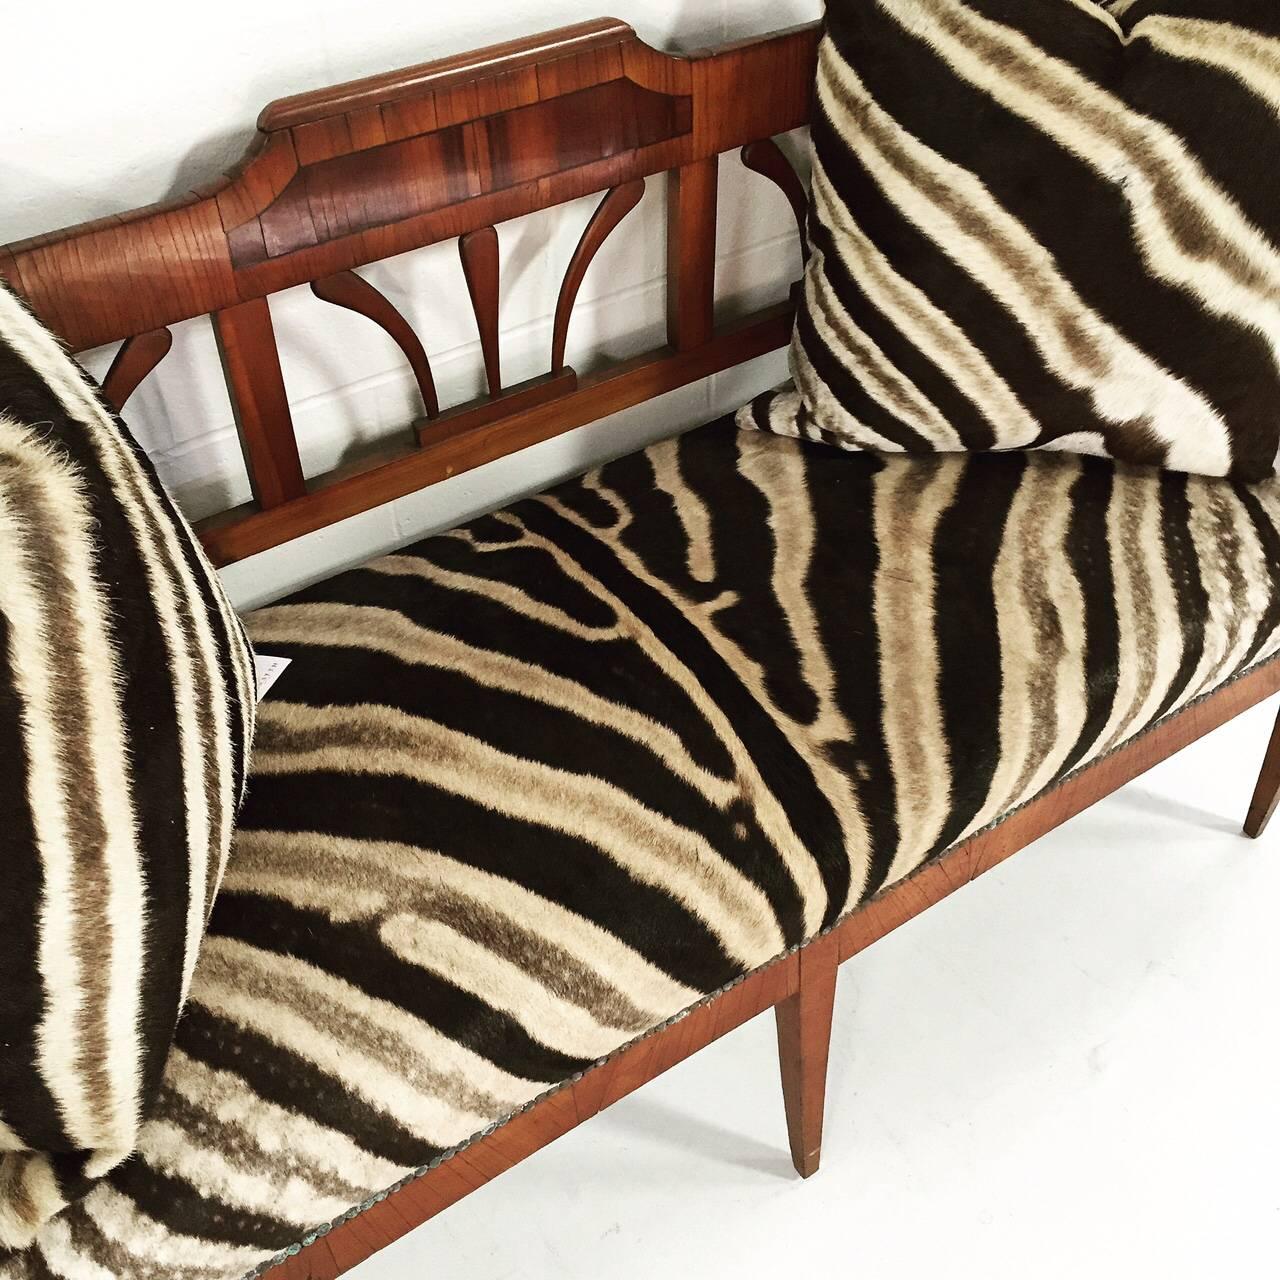 19th Century Fruitwood and Rosewood Settee in Zebra Hide with Zebra Pillows 3